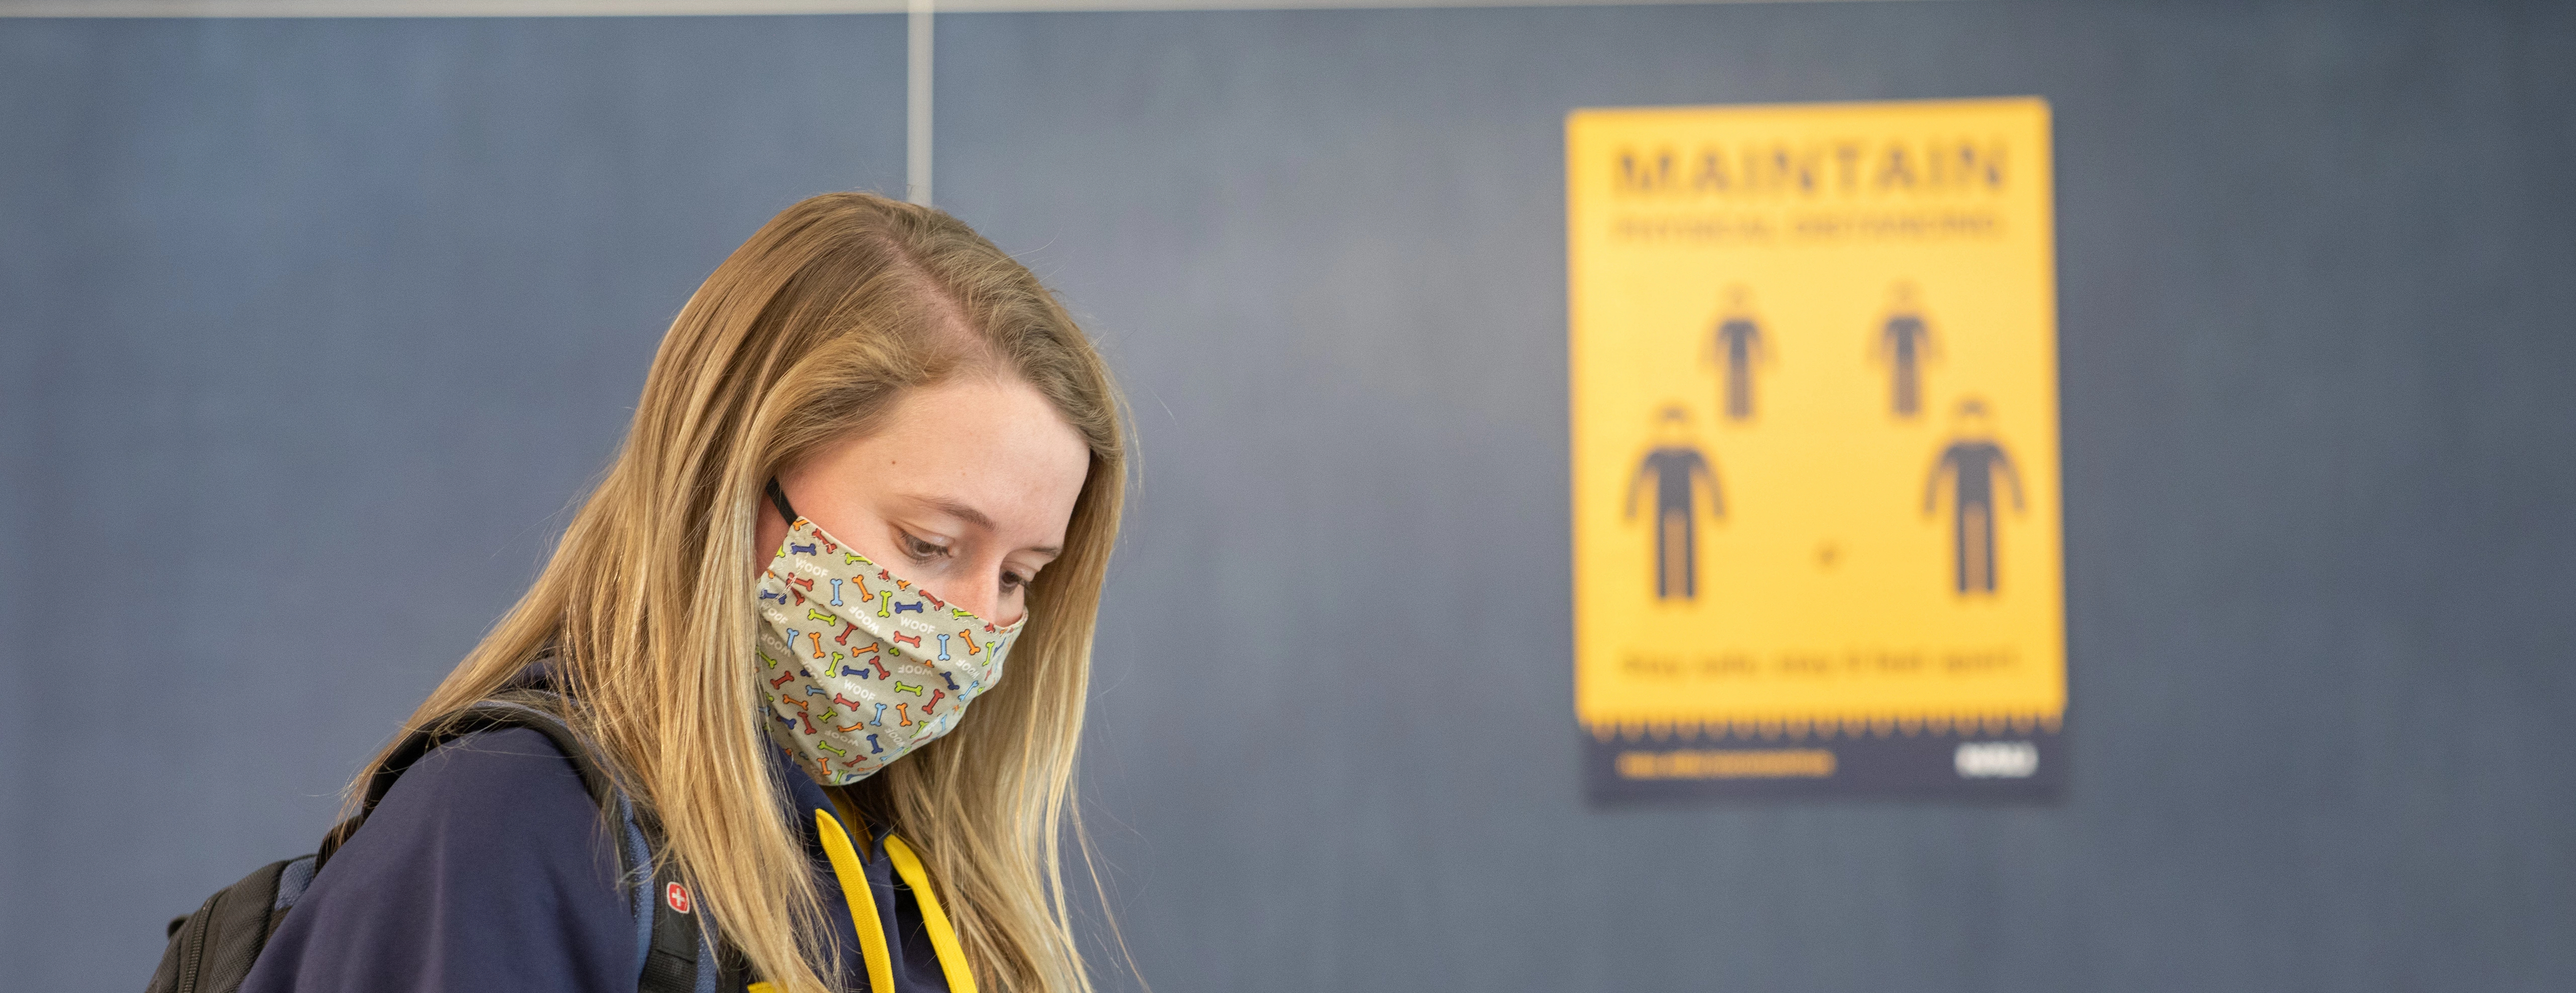 Student wears a mask on campus